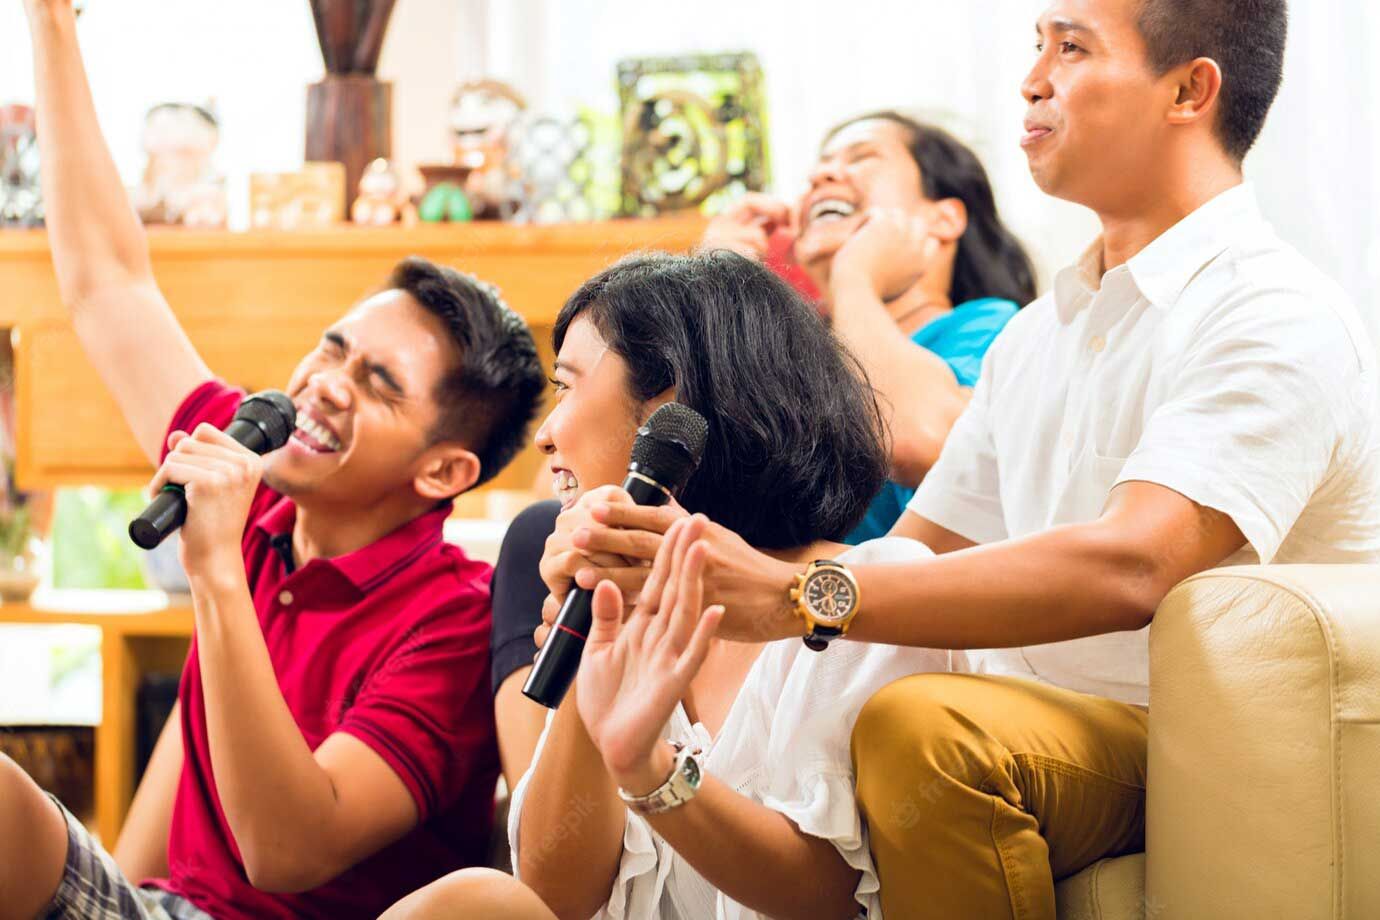 How to plan a karaoke party at home?